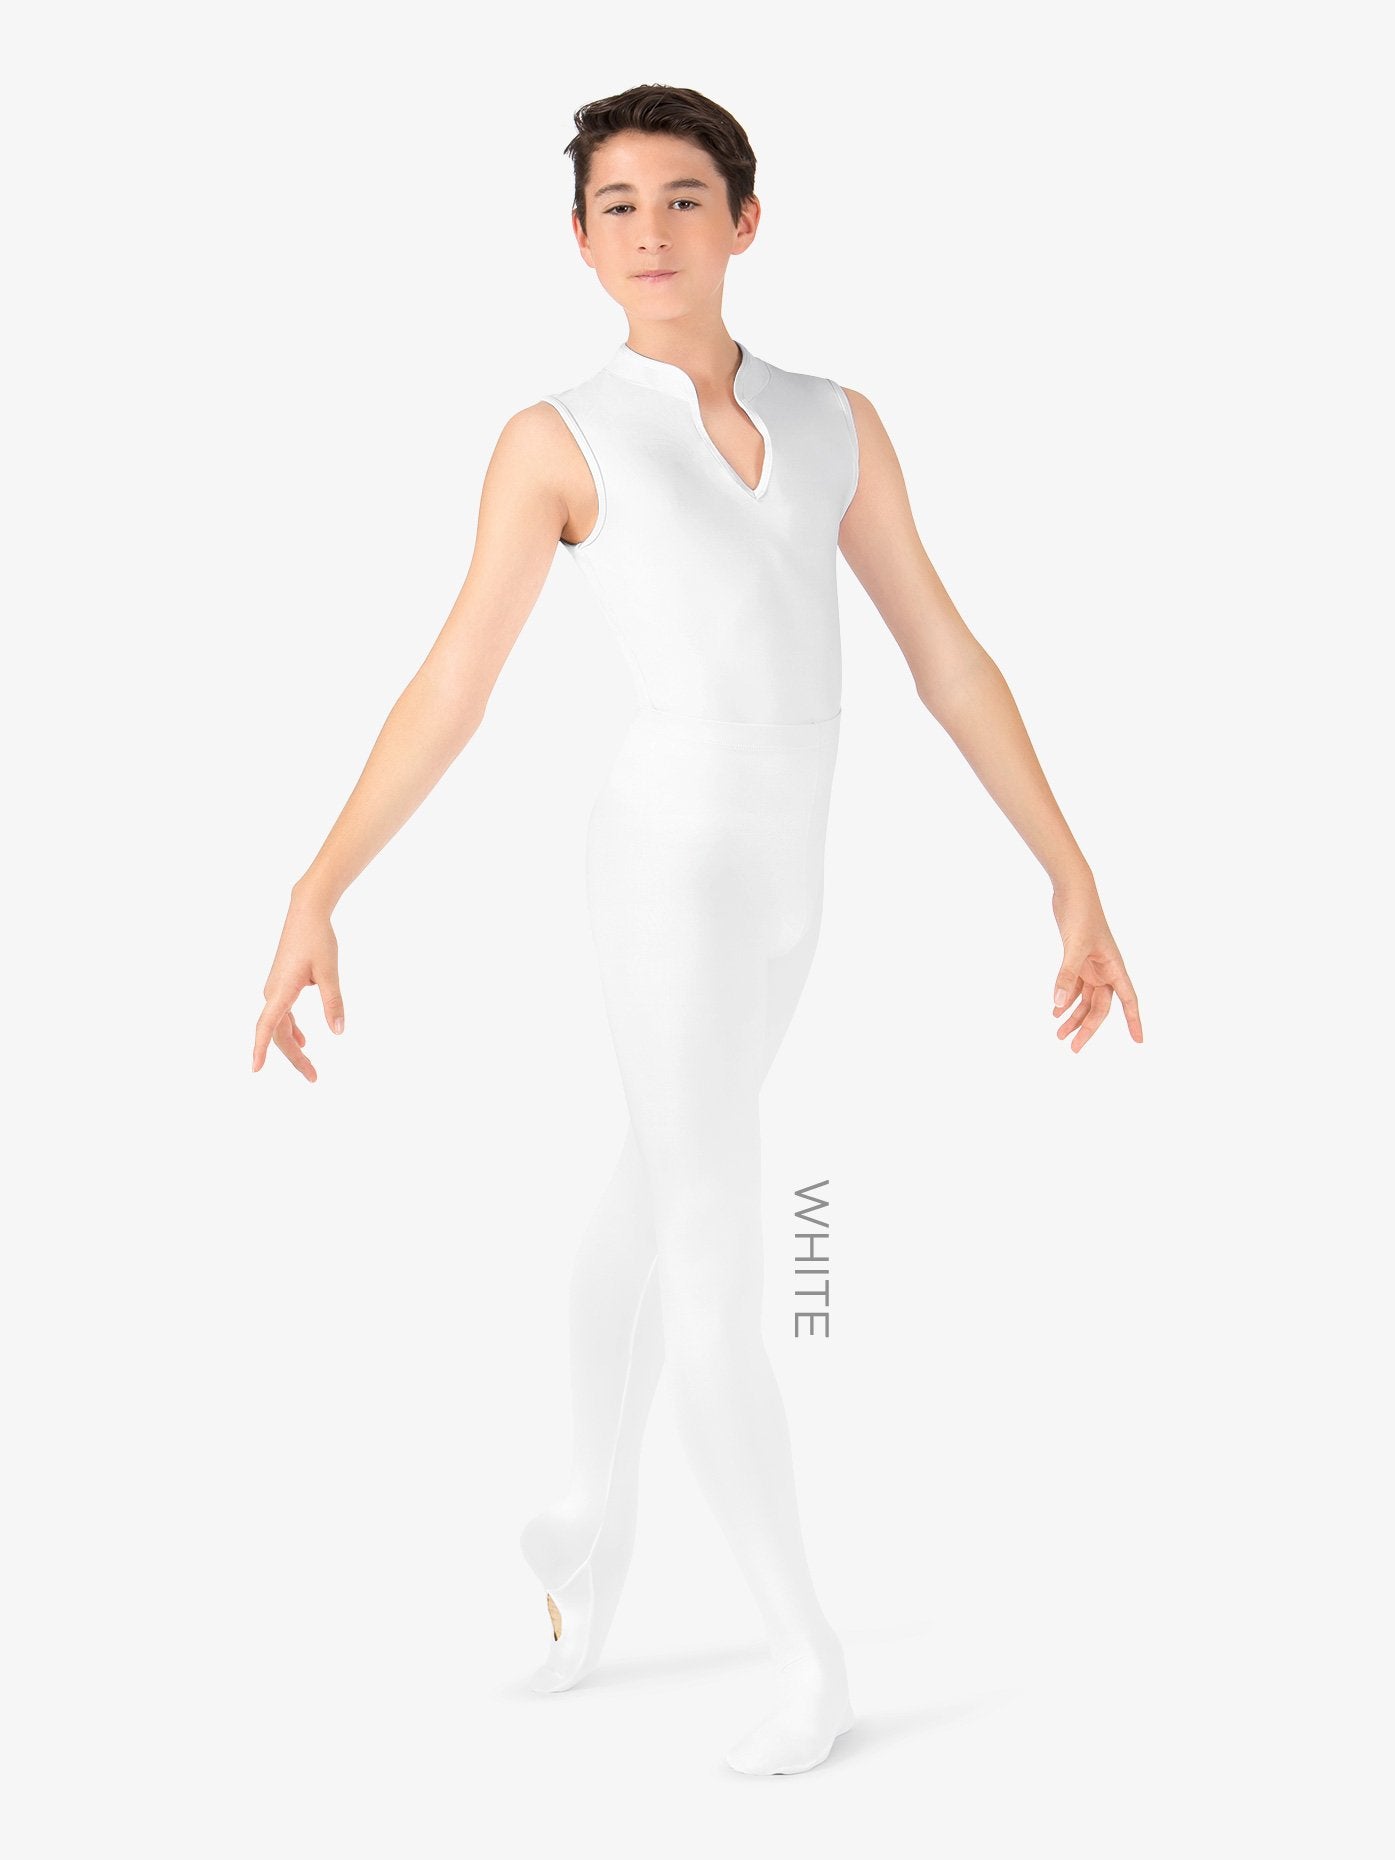 Boys 'Viggo' Convertible White Dance Tights: Versatile and comfortable tights for young male dancers